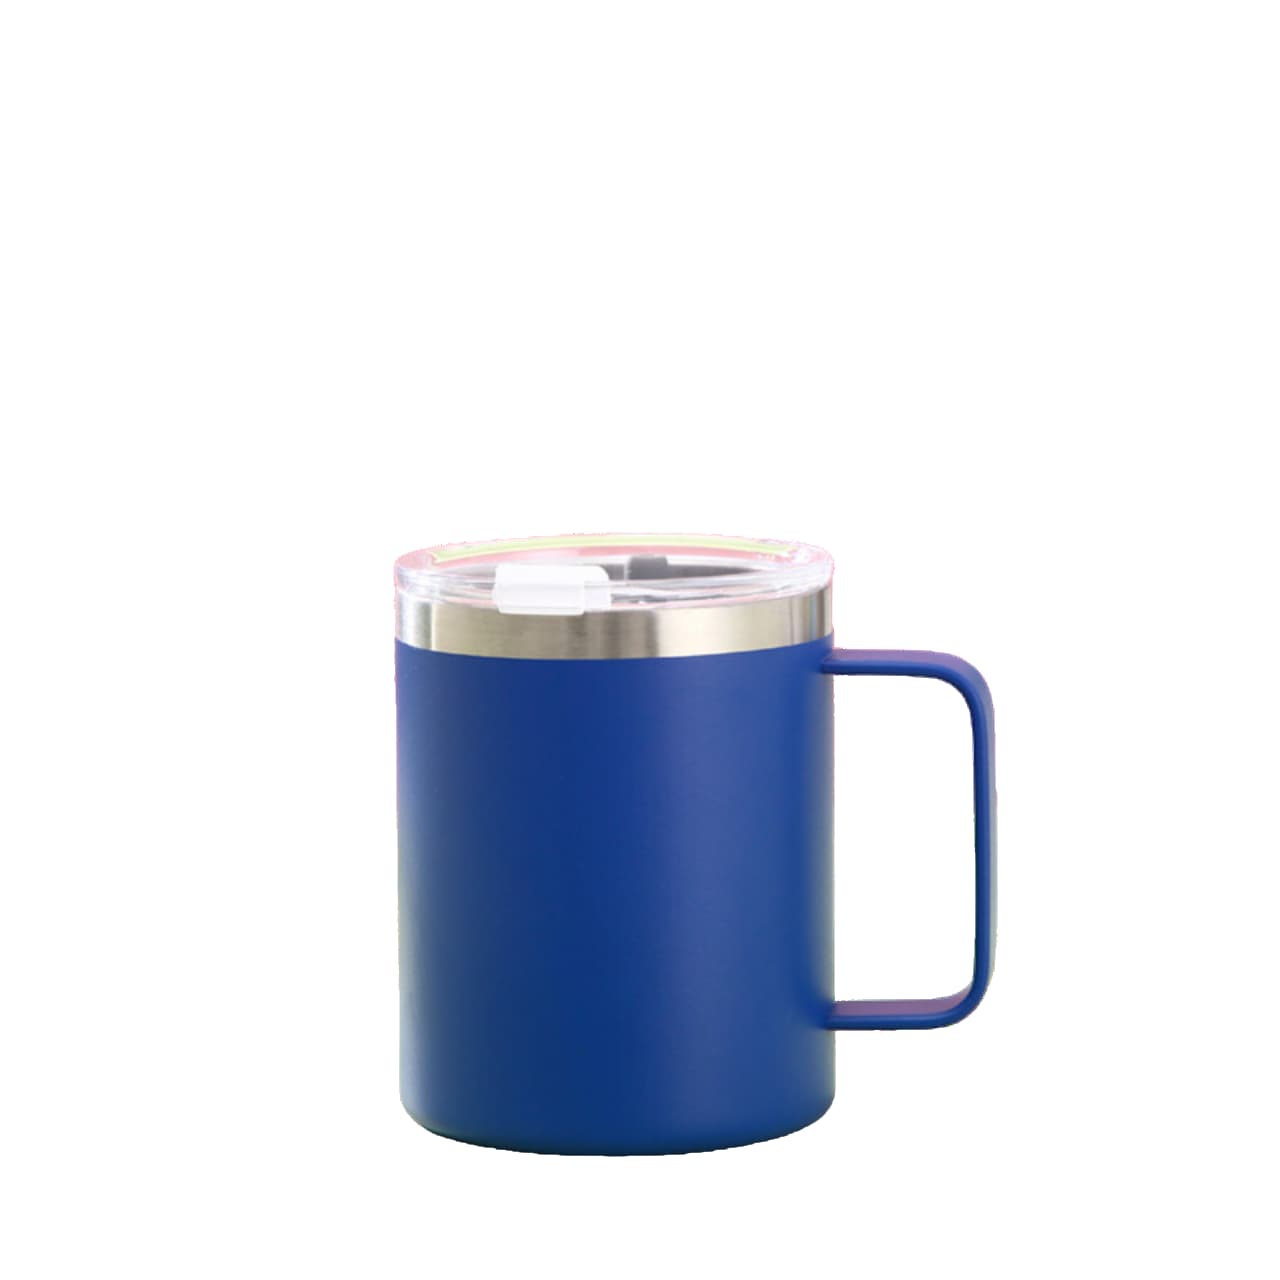 304 stainless steel CUP with handle-blue